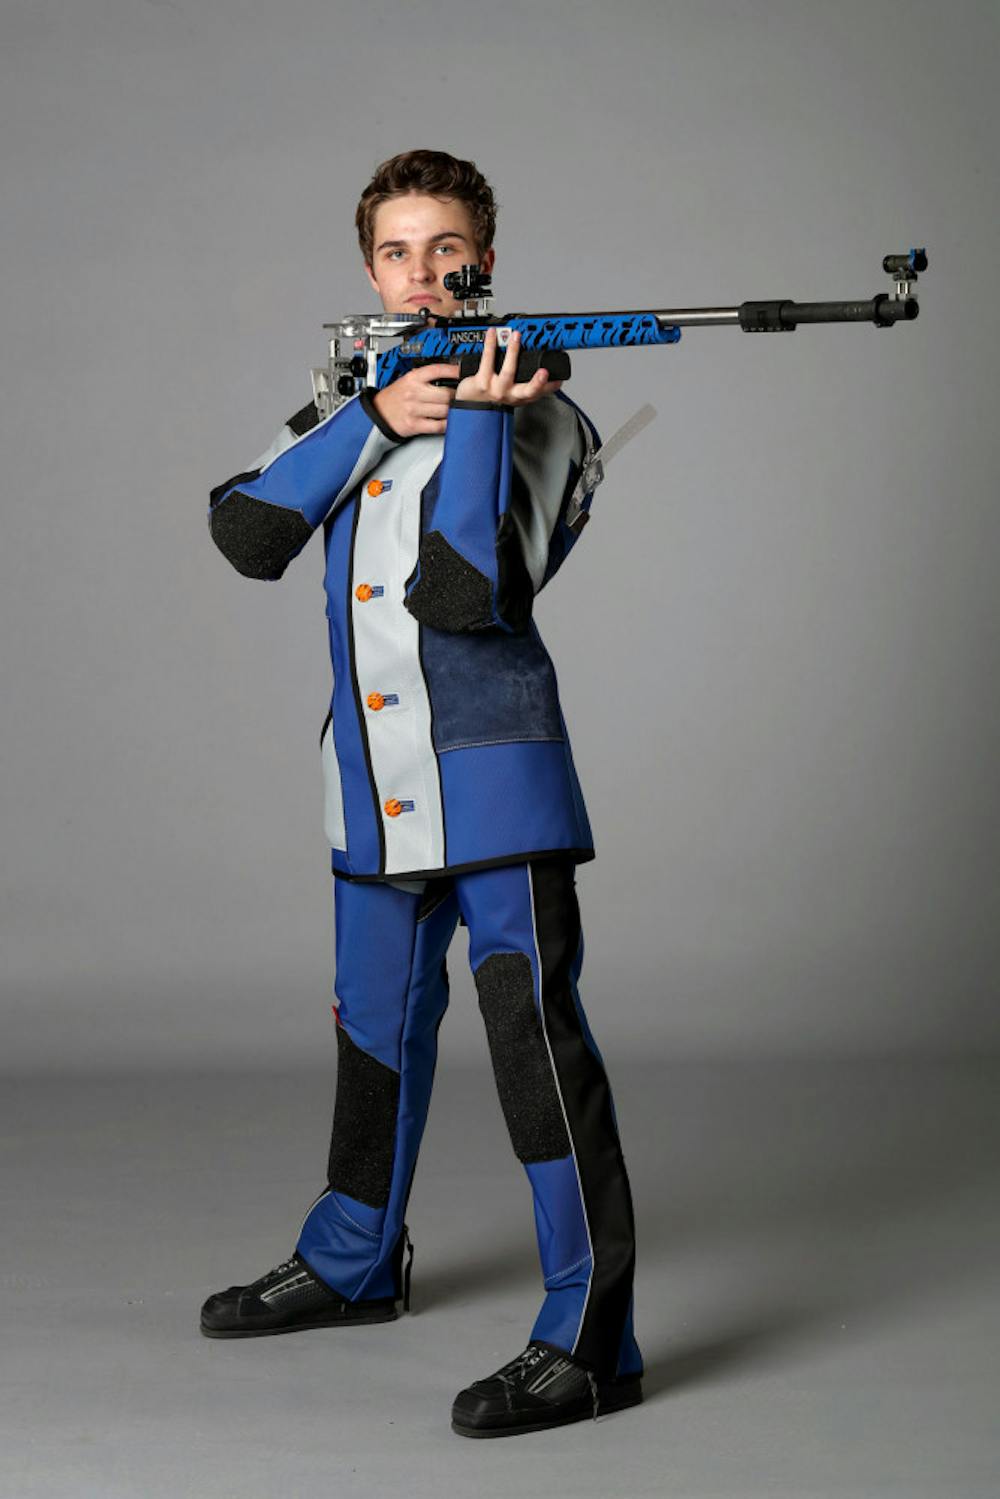 <p>Matt Dorey poses for the camera. Dorey helped Memphis rifle finished second behind No. 3 Kentucky by an aggregate score of 4650-4686 in the Tigers second to last match of the 2017 campaign.</p>